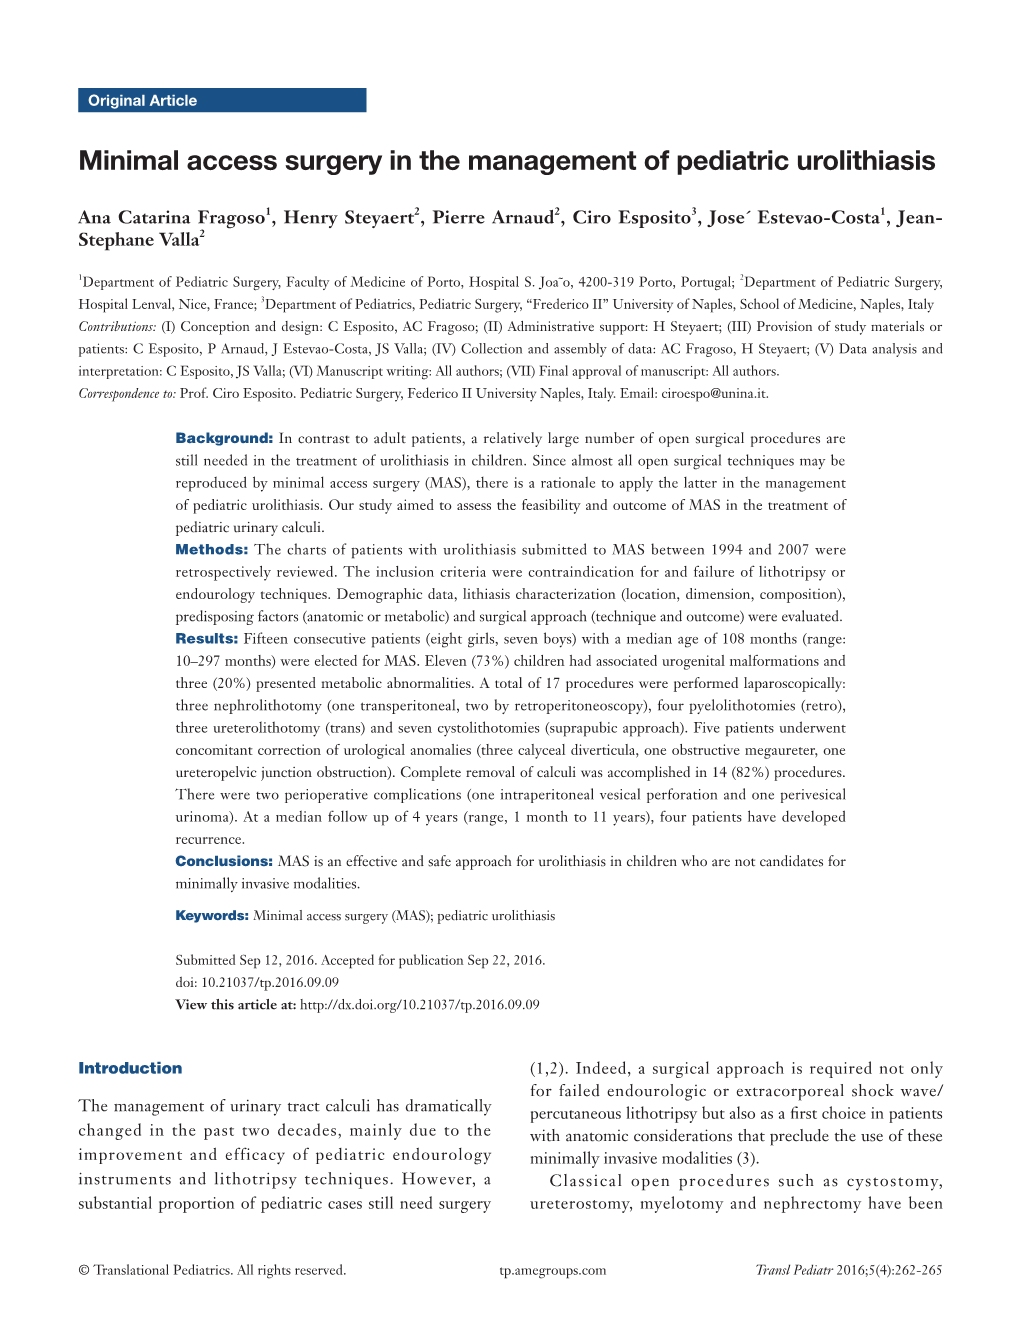 Minimal Access Surgery in the Management of Pediatric Urolithiasis